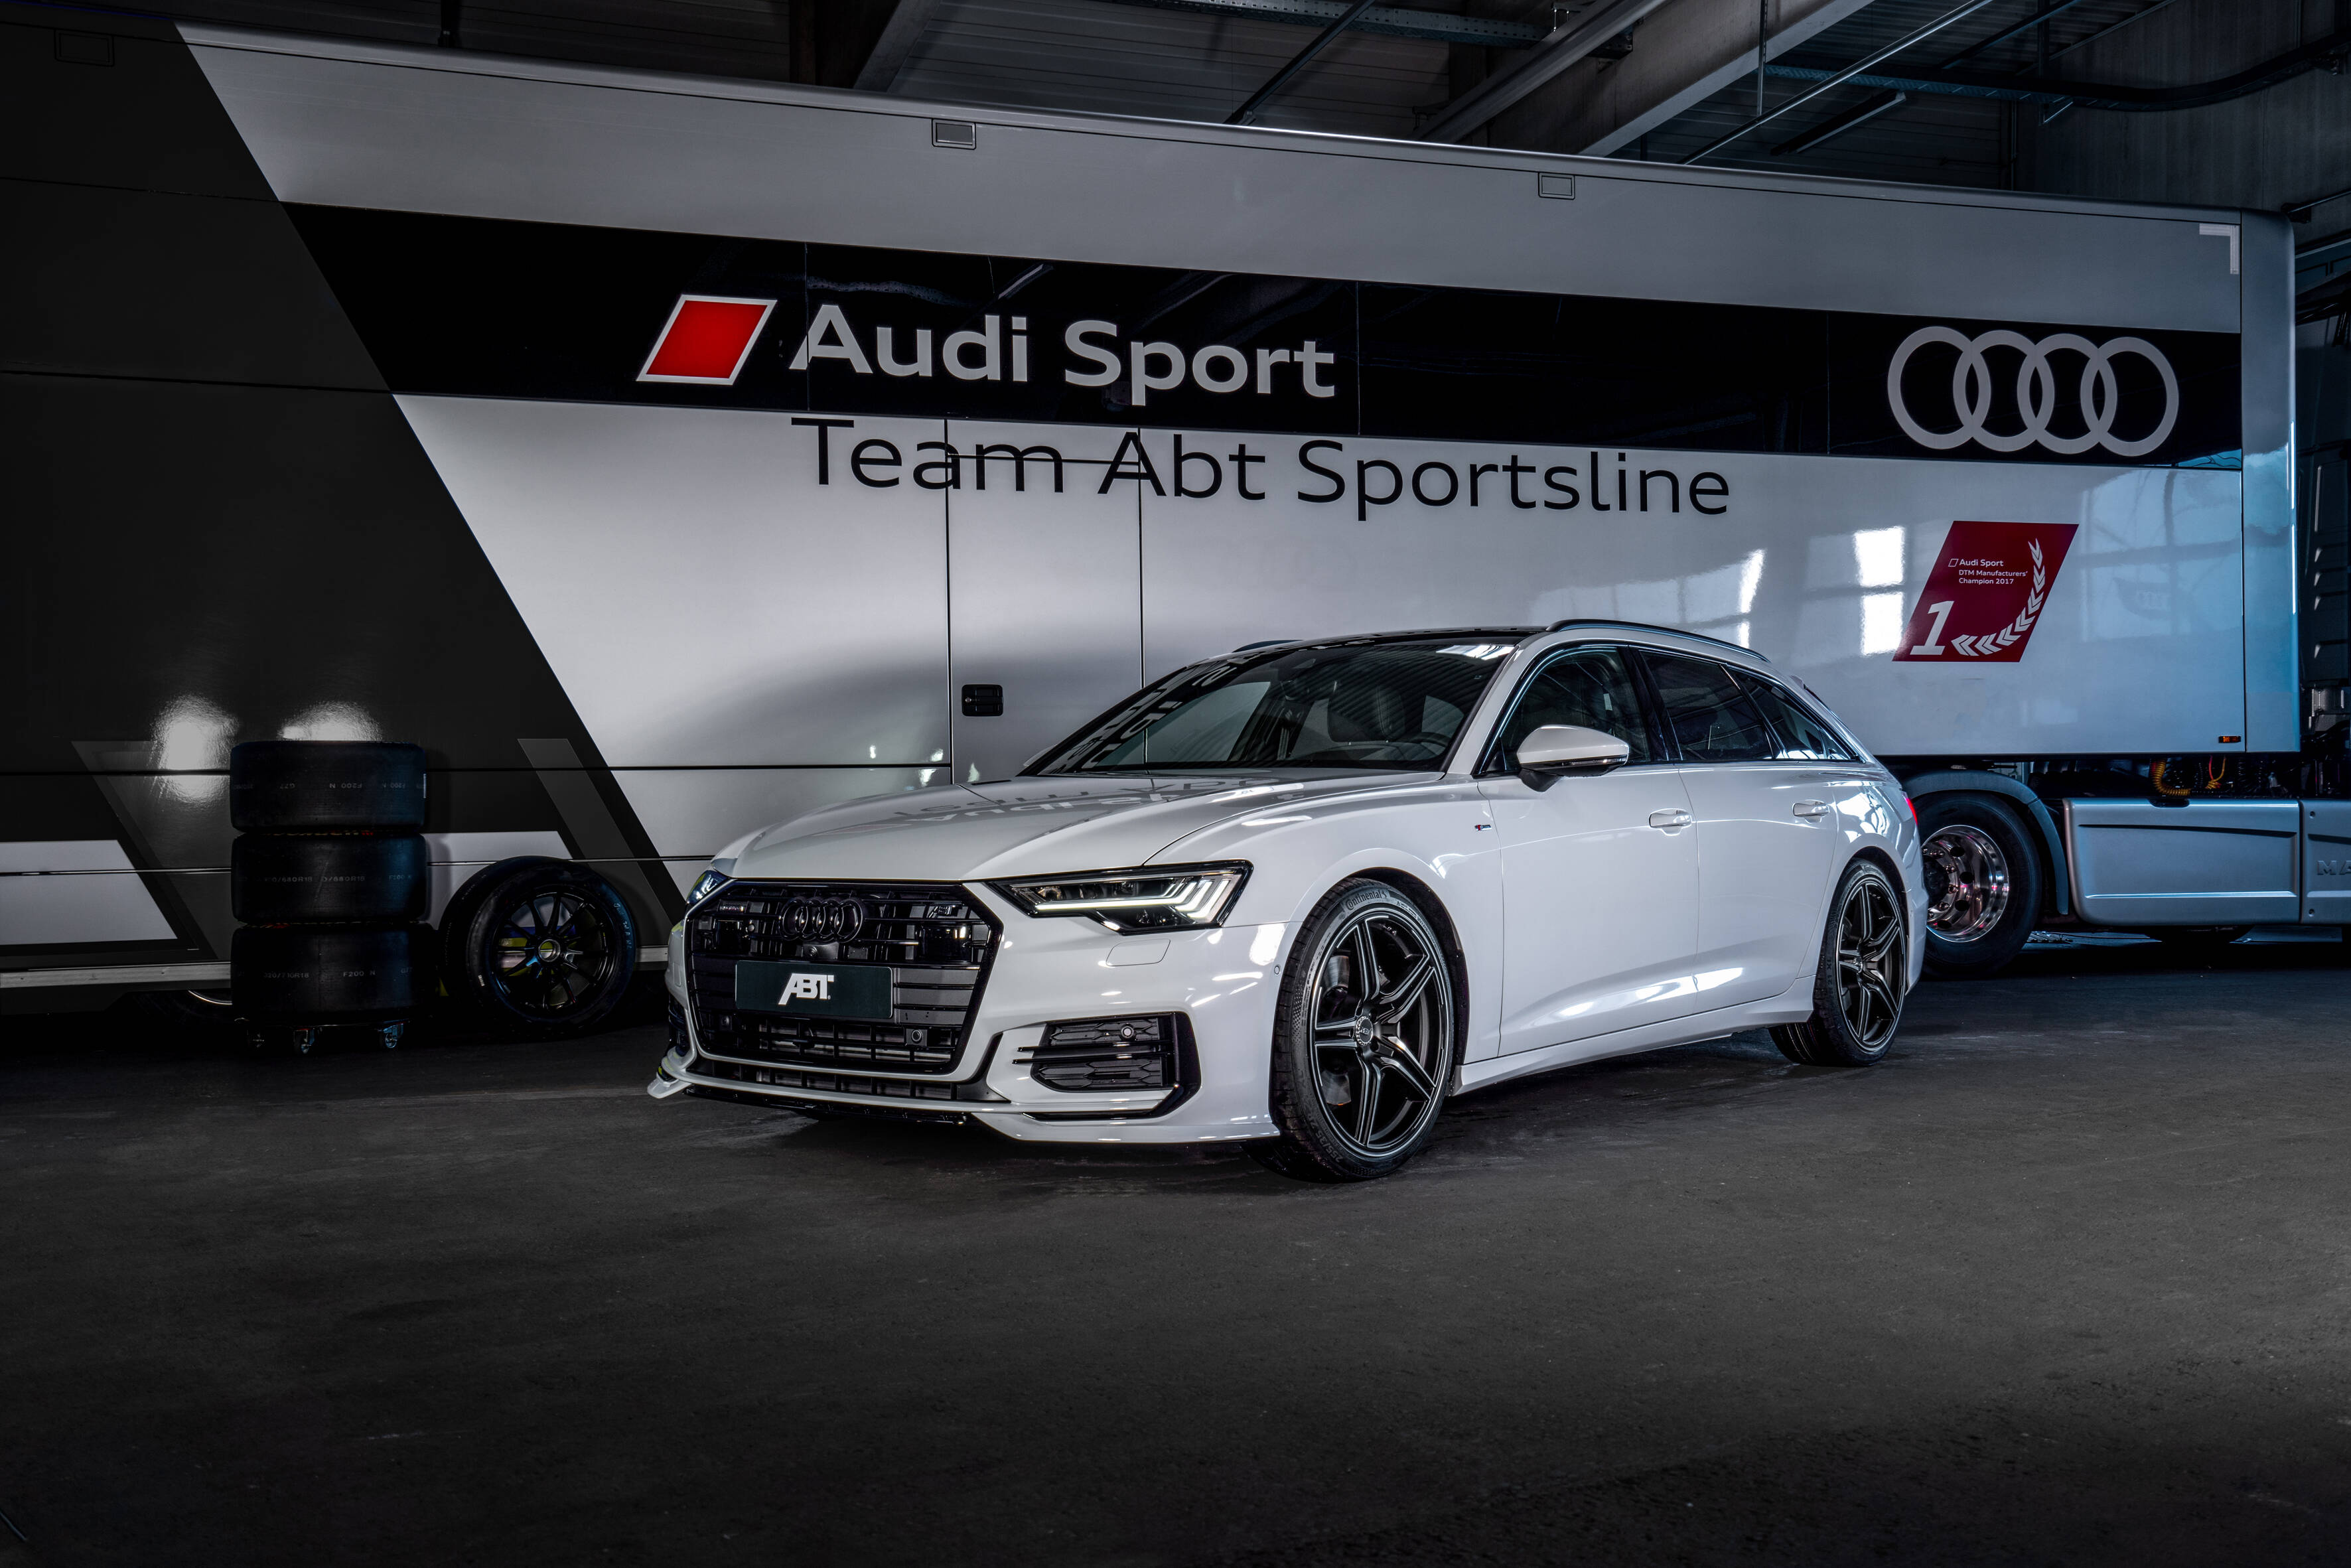 The ABT POWER DAYS are back - Audi Tuning, VW Tuning, Chiptuning